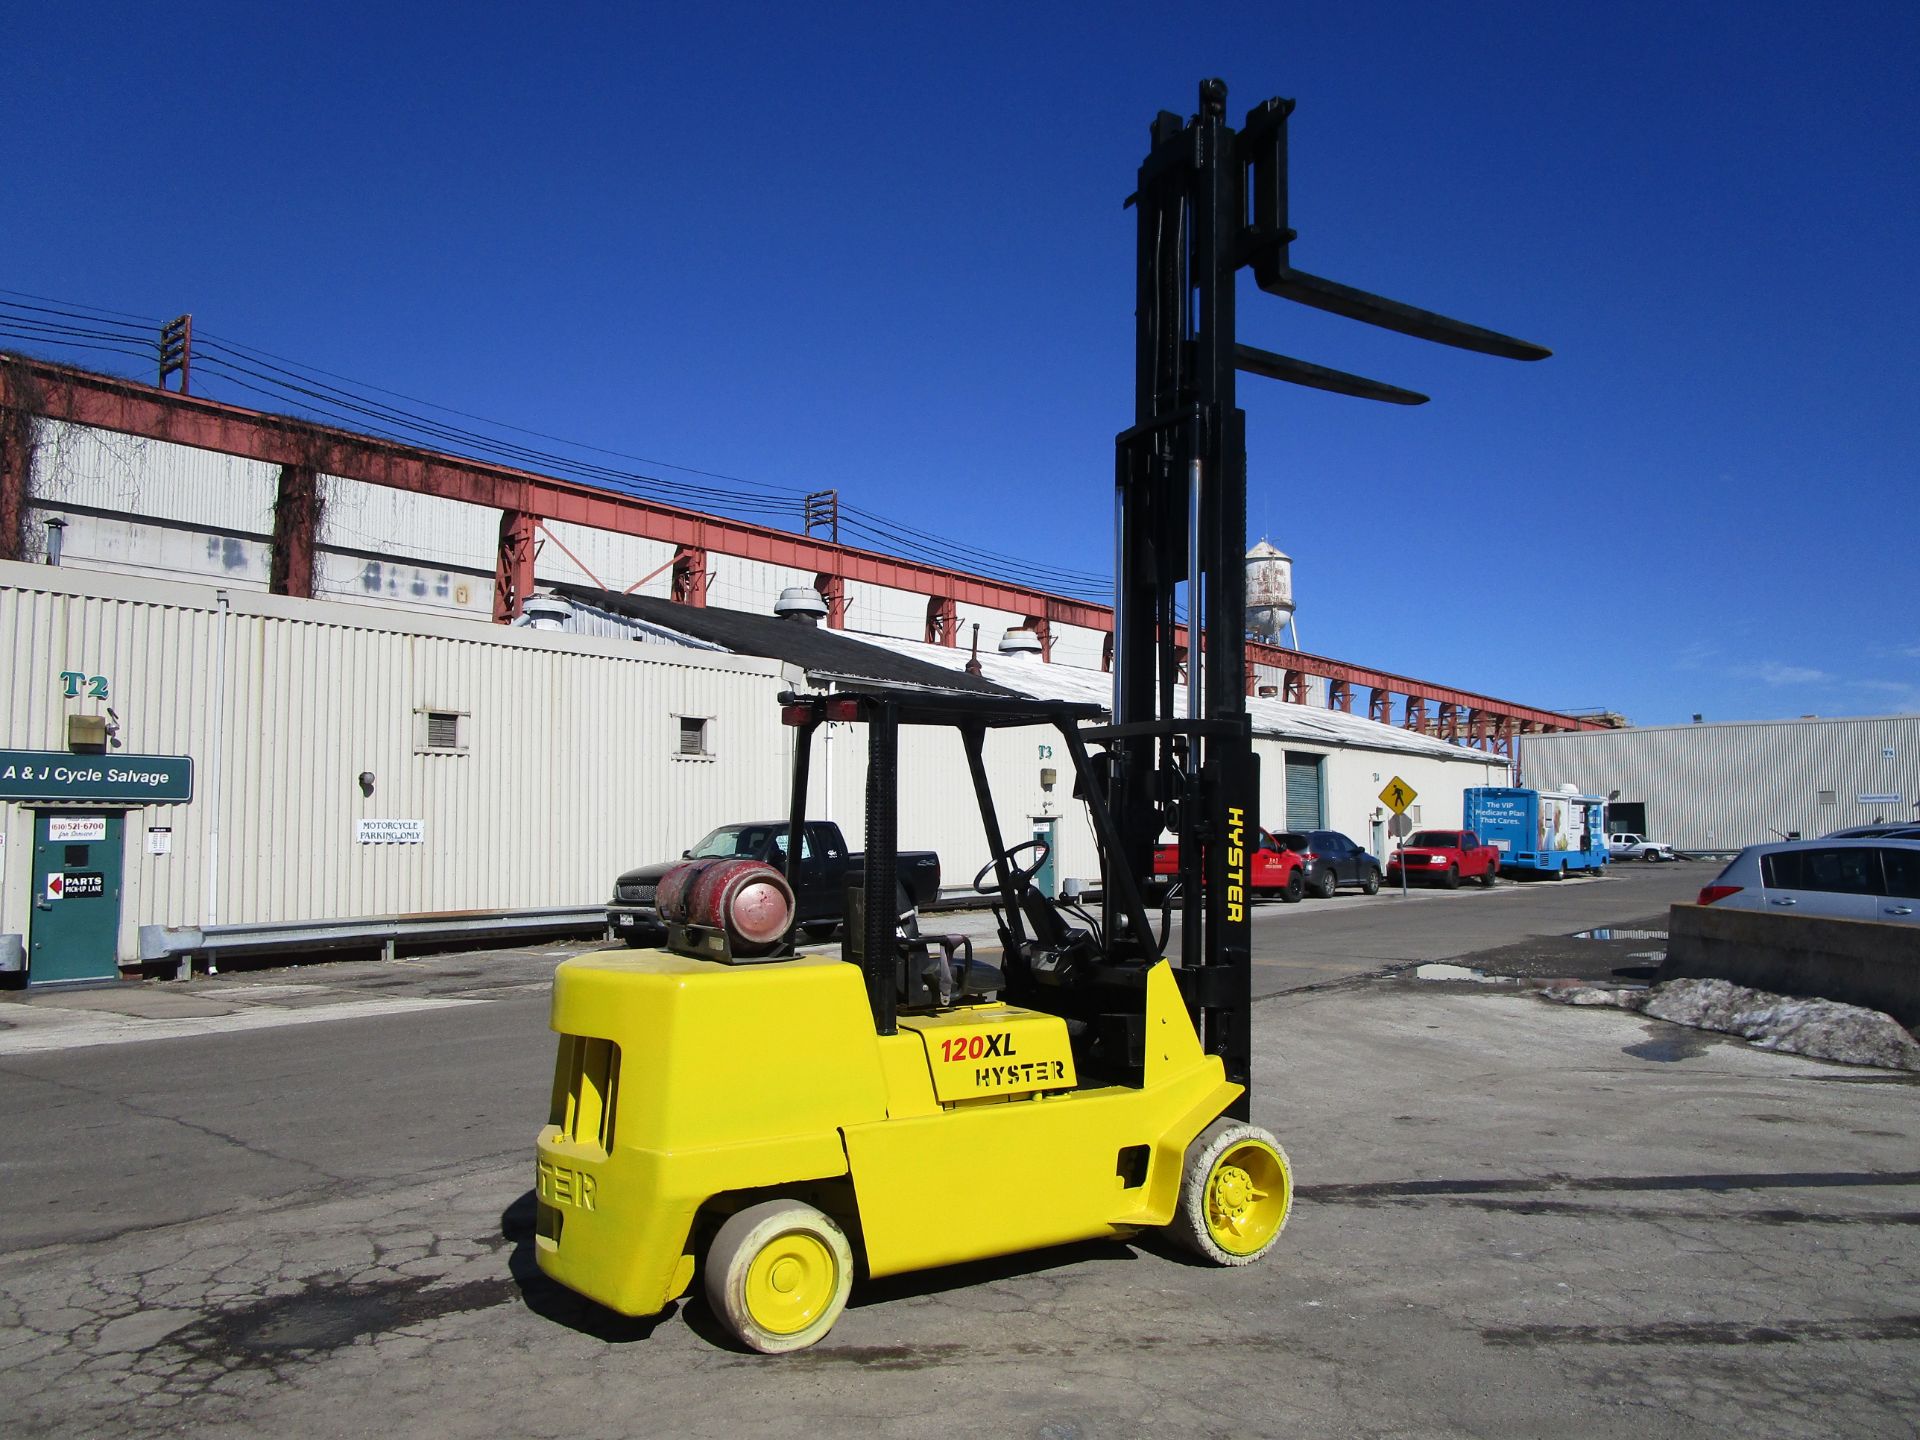 Hyster S120XL 12,000lb Forklift - Image 13 of 17